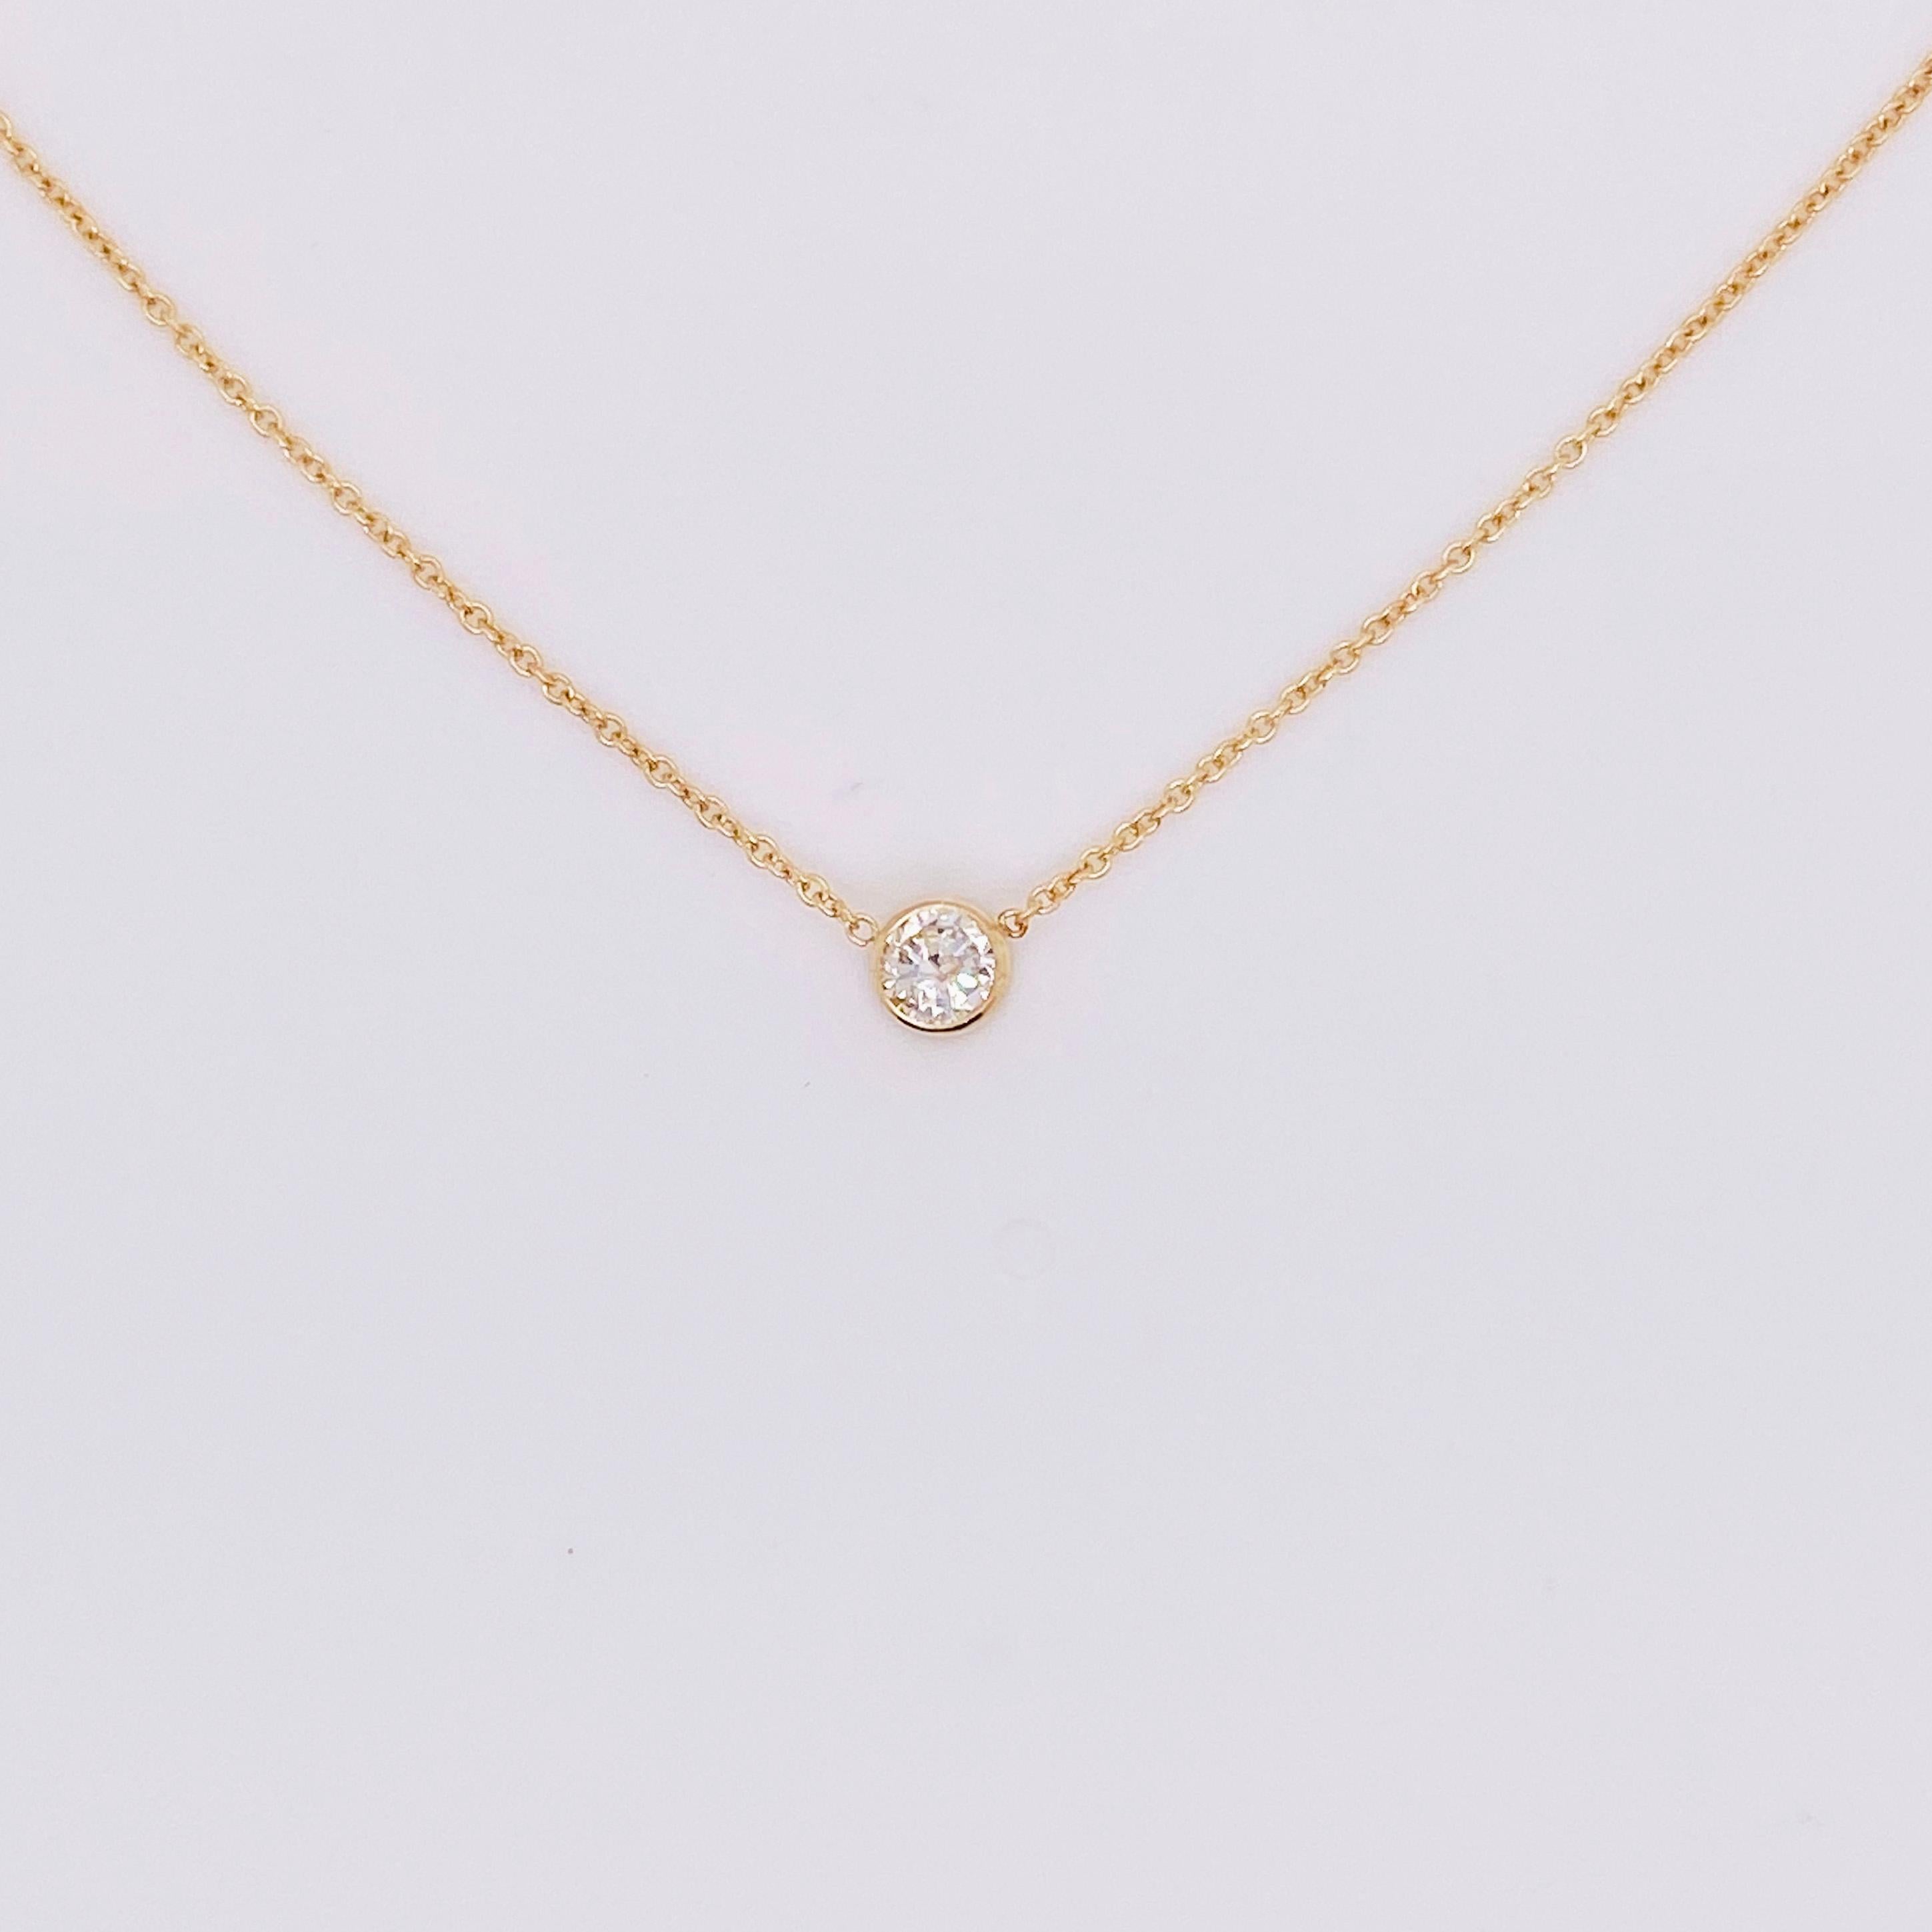 This diamond necklace has a beautiful 0.09 carat diamond set in a stunning 14 karat yellow gold bezel and rope chain. This necklace is a classic design that is perfect on any neck. The elegant rope chain is the perfect design for a bezel set